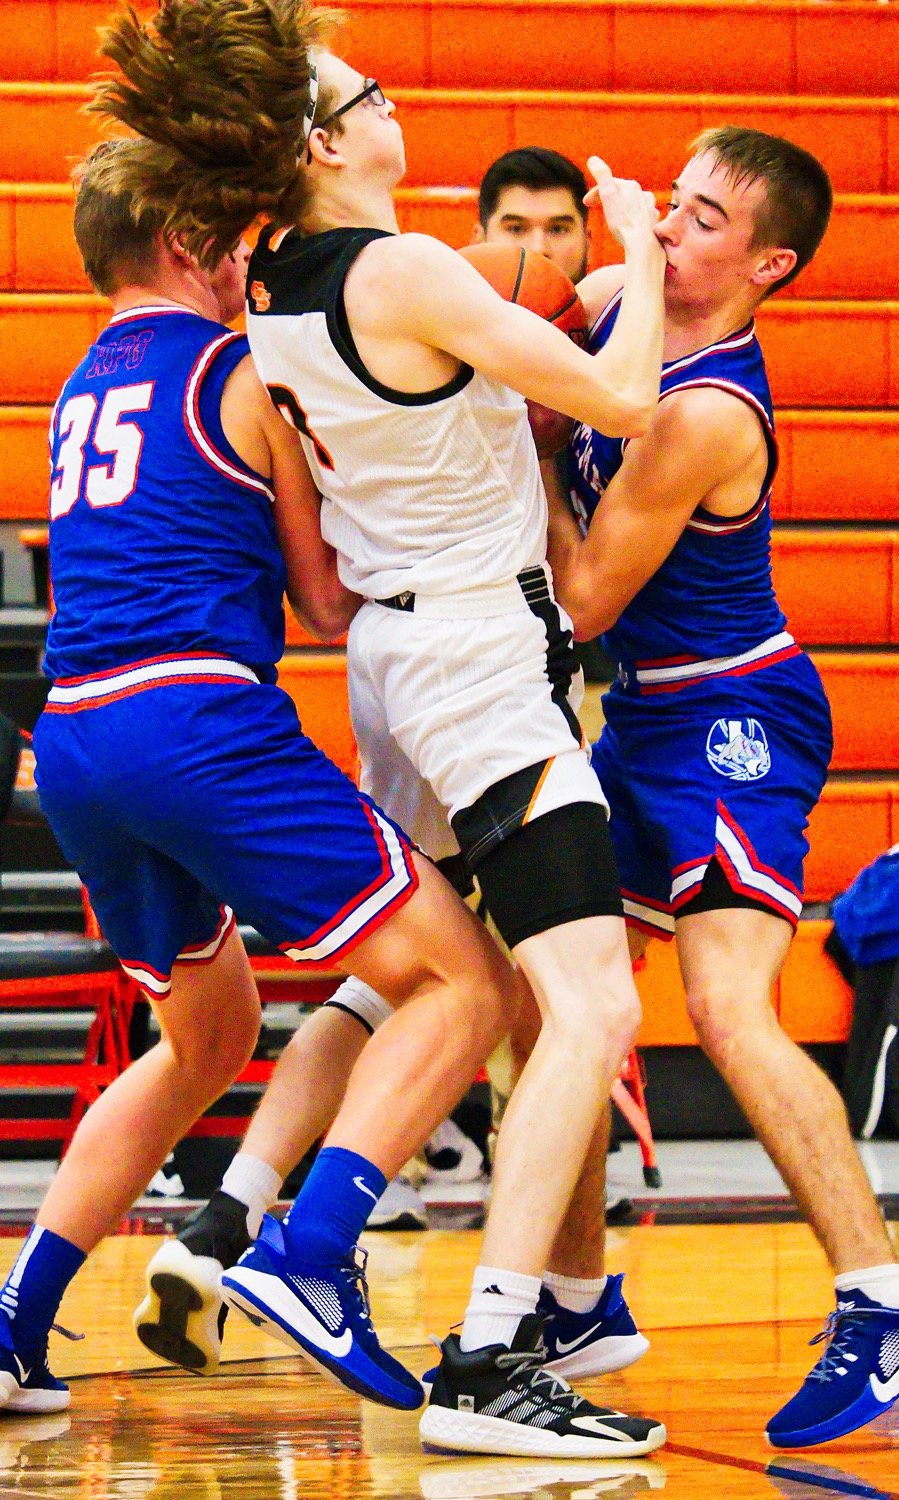 Garin Kisinger, left, and Ford Tannebaum converge defensively on the Grand Saline player.